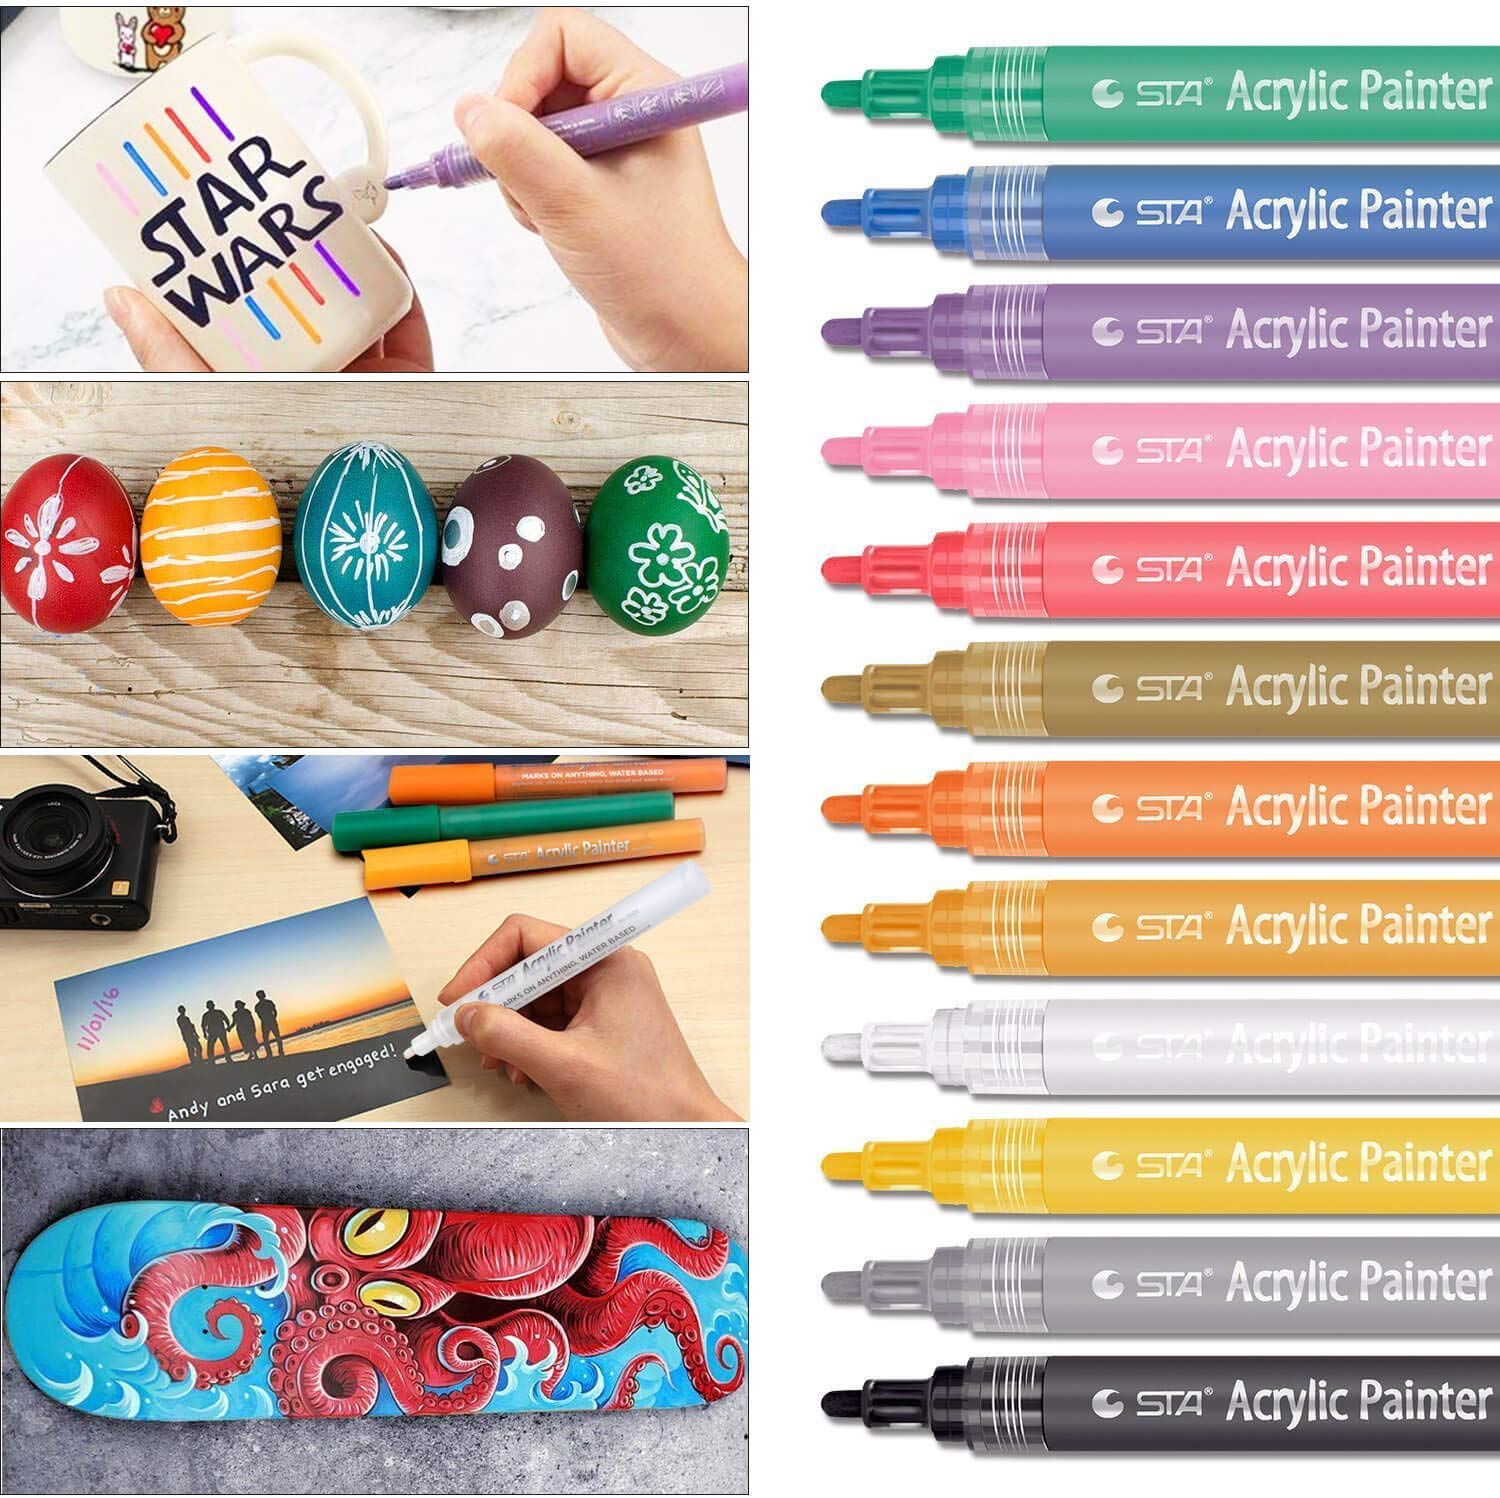 STA 1000 Acrylic Painter Marker Pens 12 Color for Glass Rock Wood Canvas